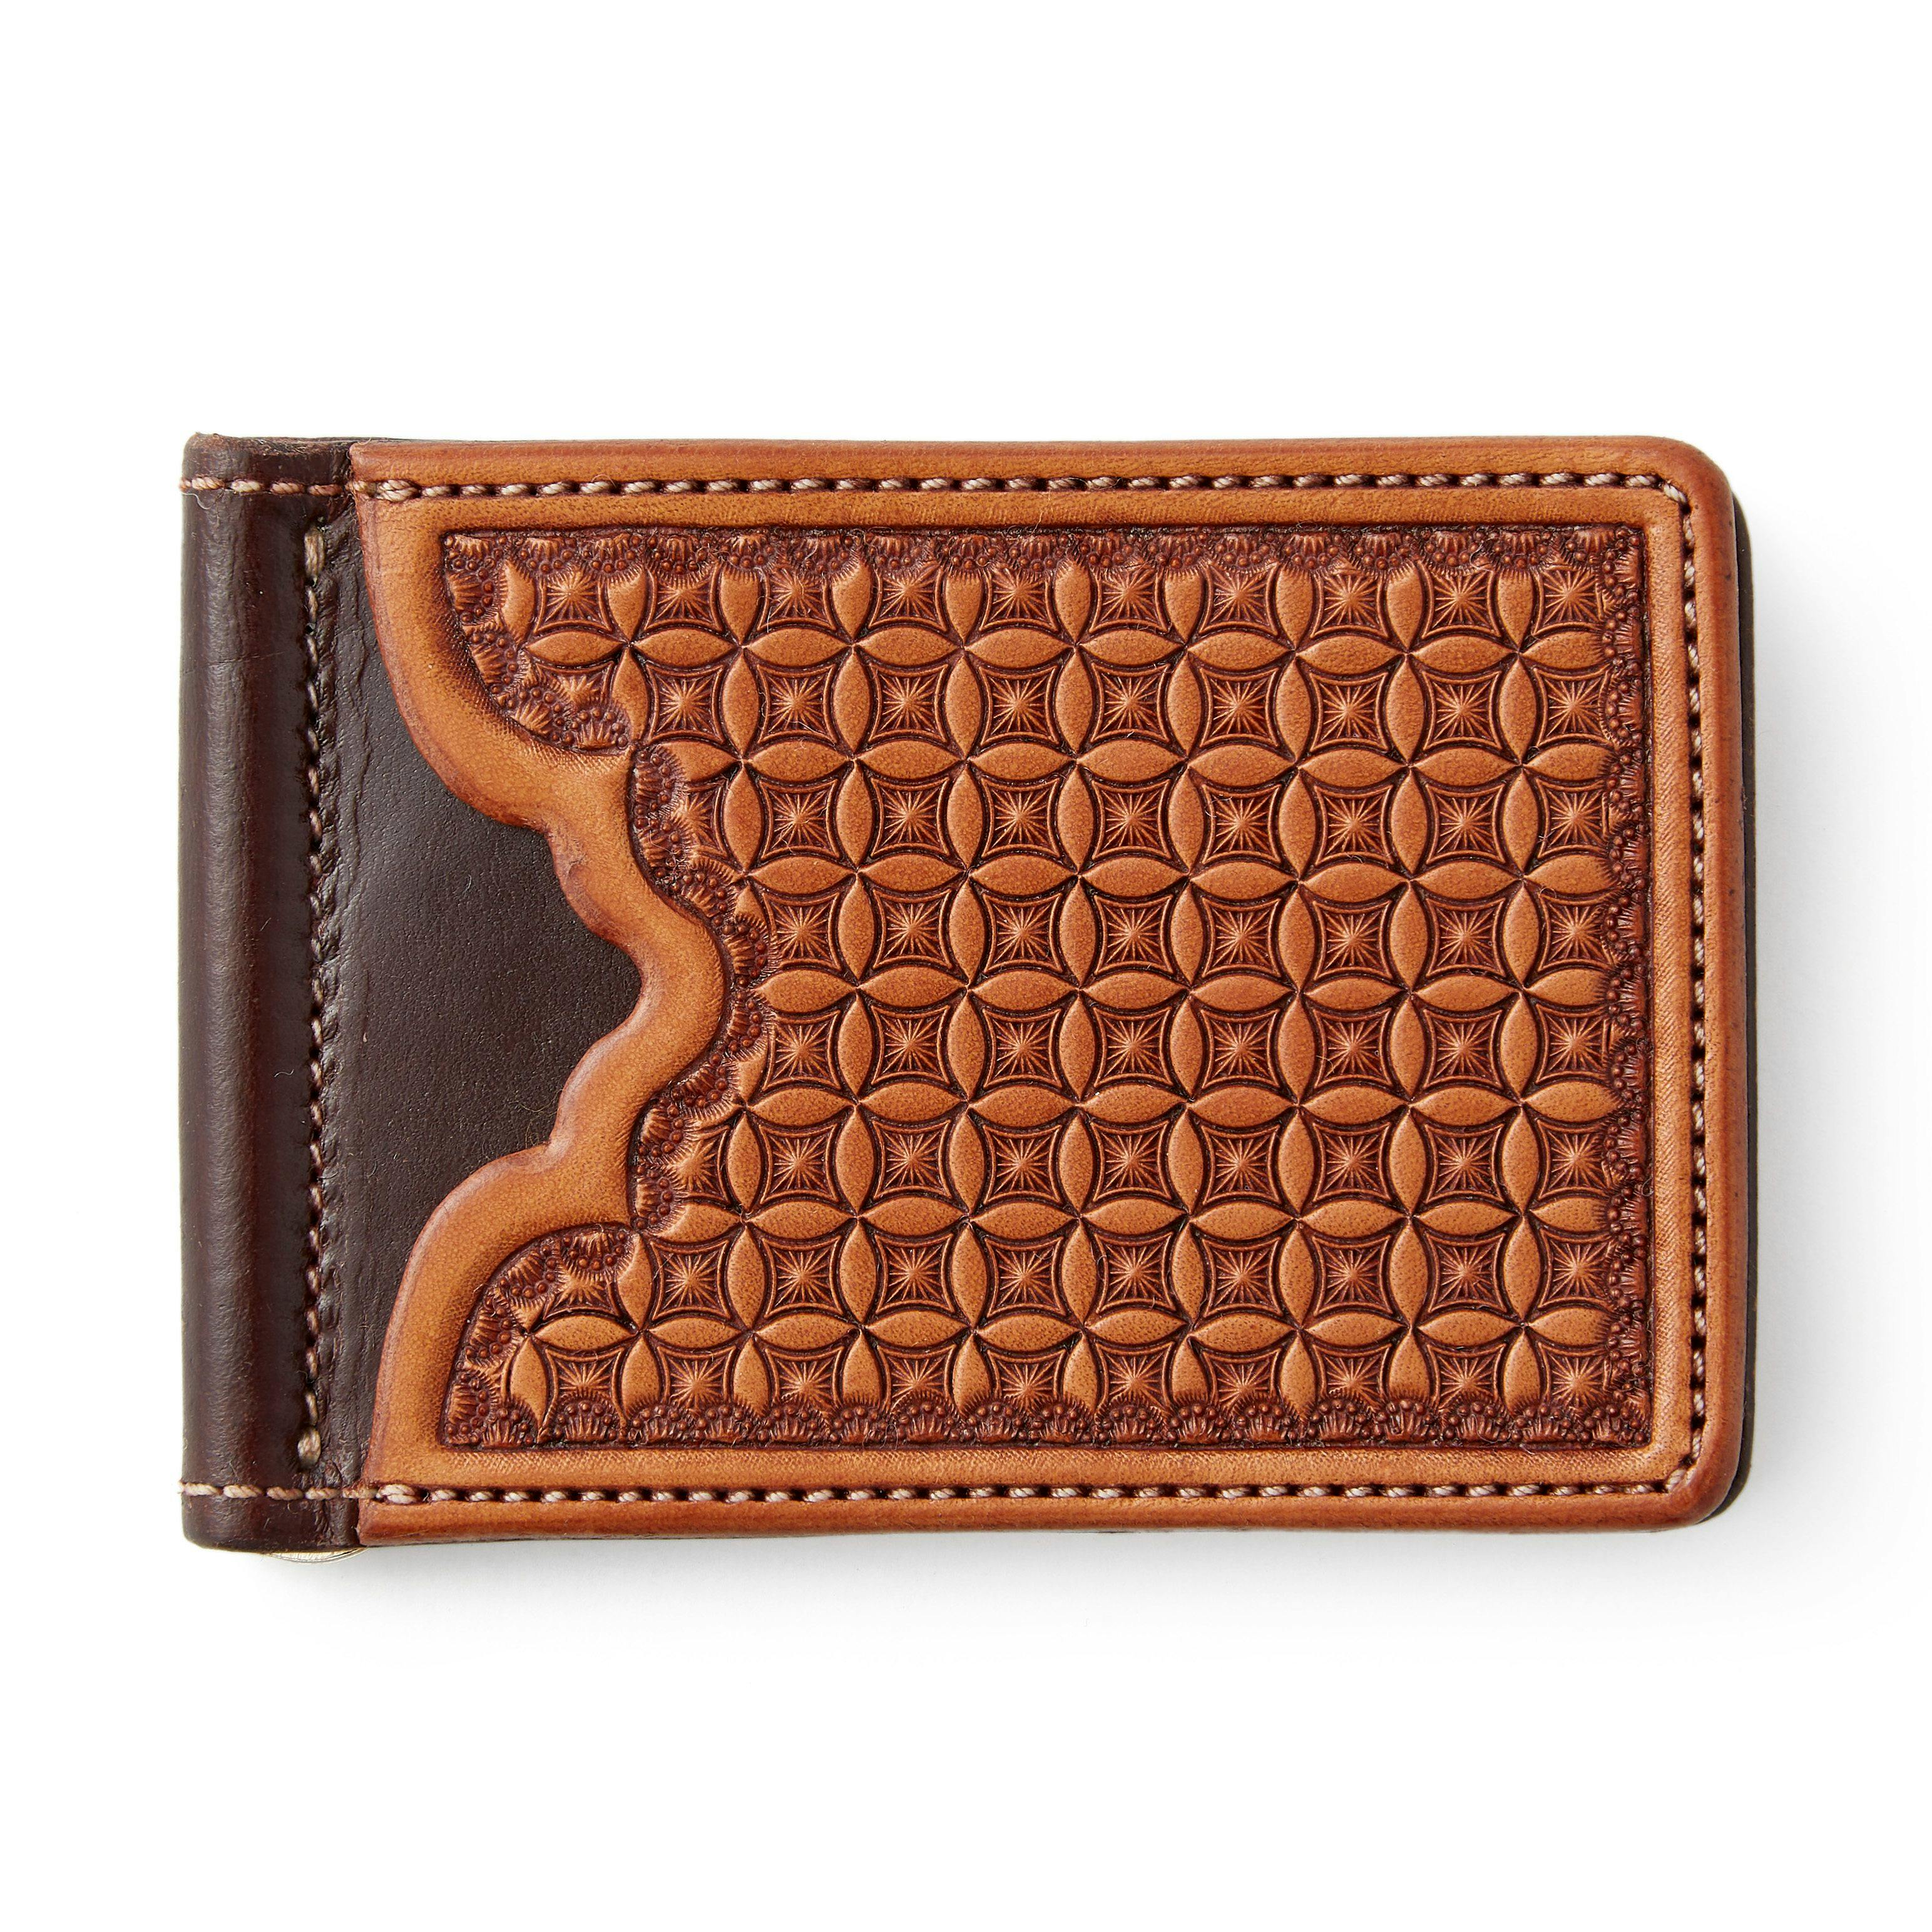 King's Saddlery Leather Money Clip Wallet